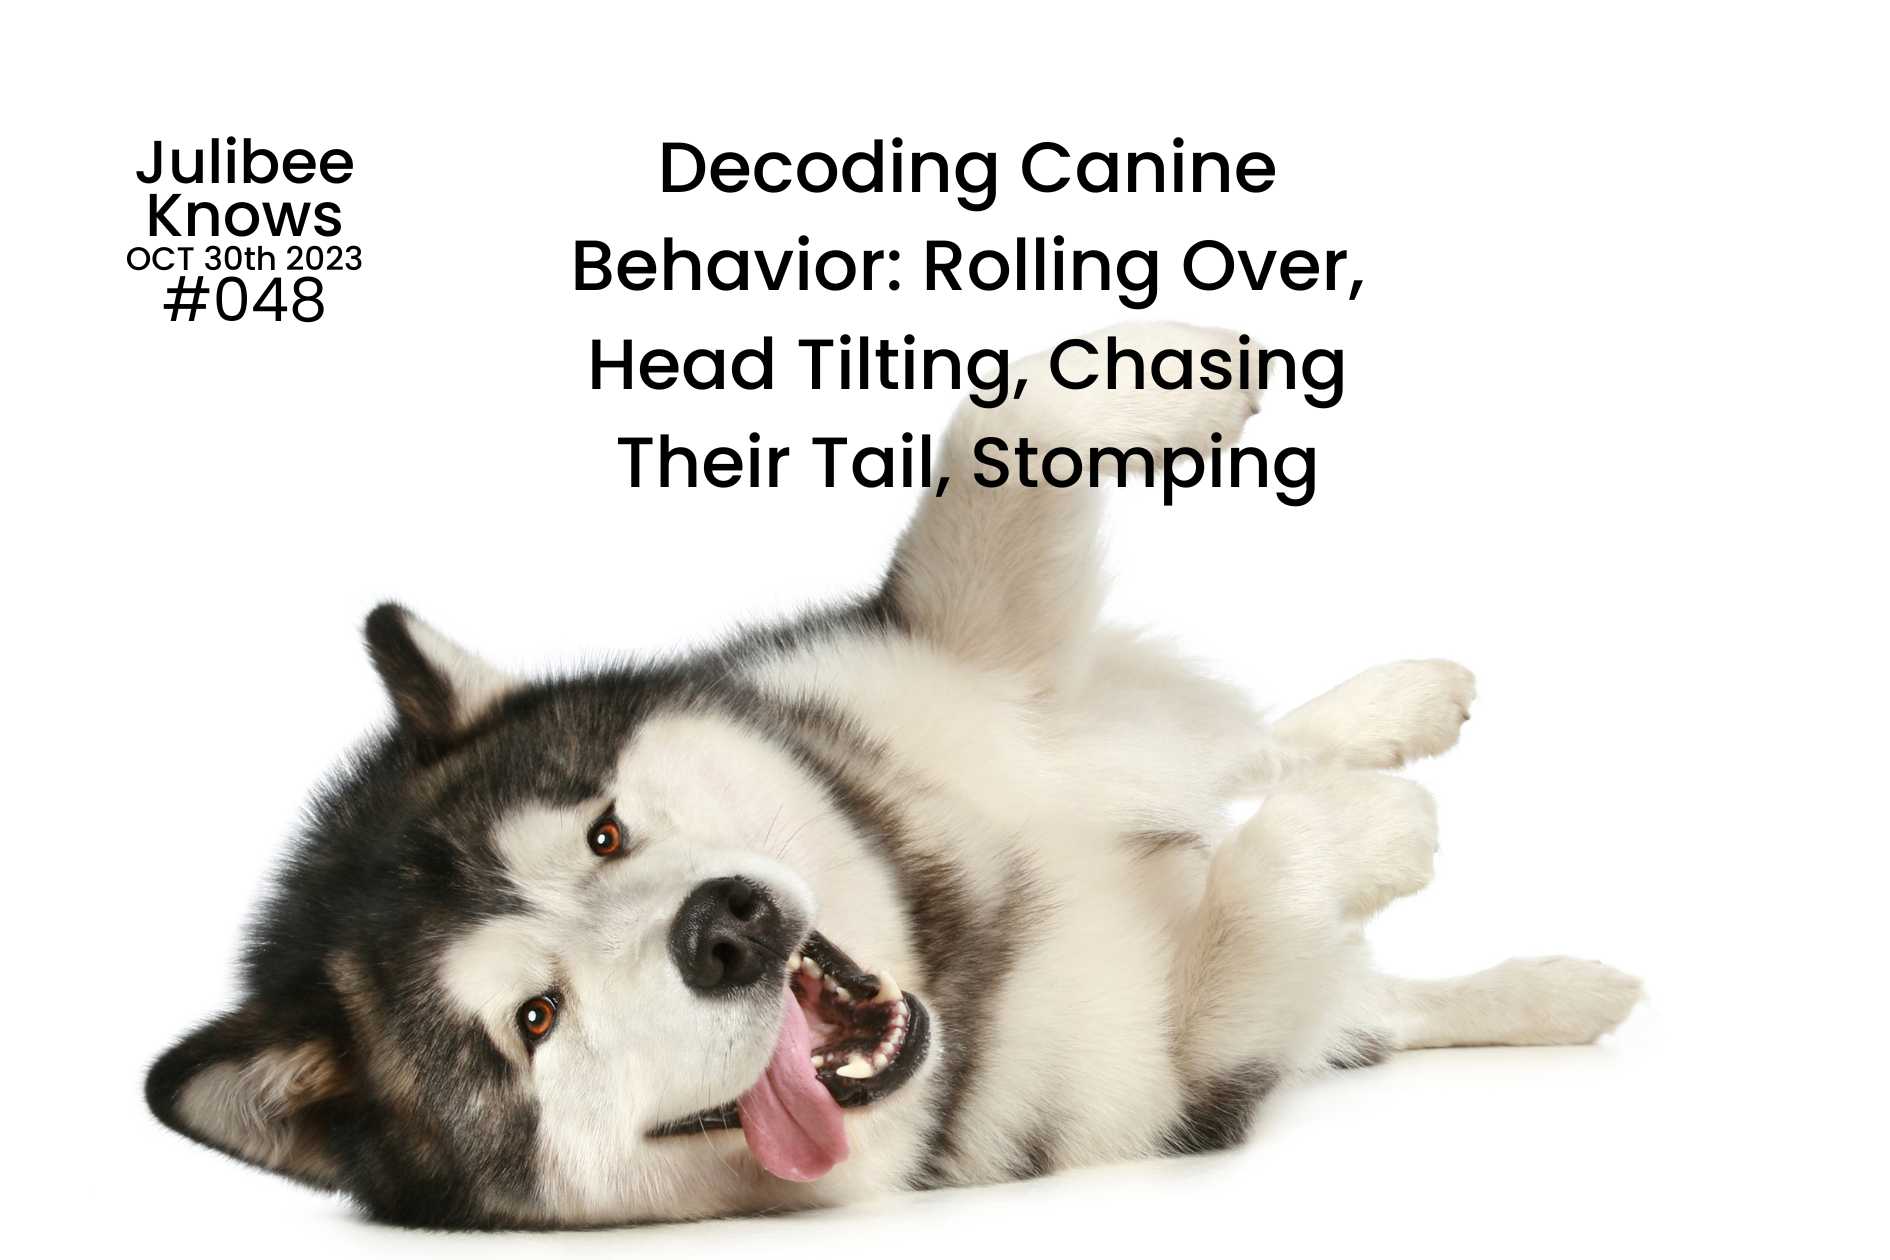 Decoding Canine Behavior: Rolling Over, Head Tilting, Chasing Their Tail, Stomping